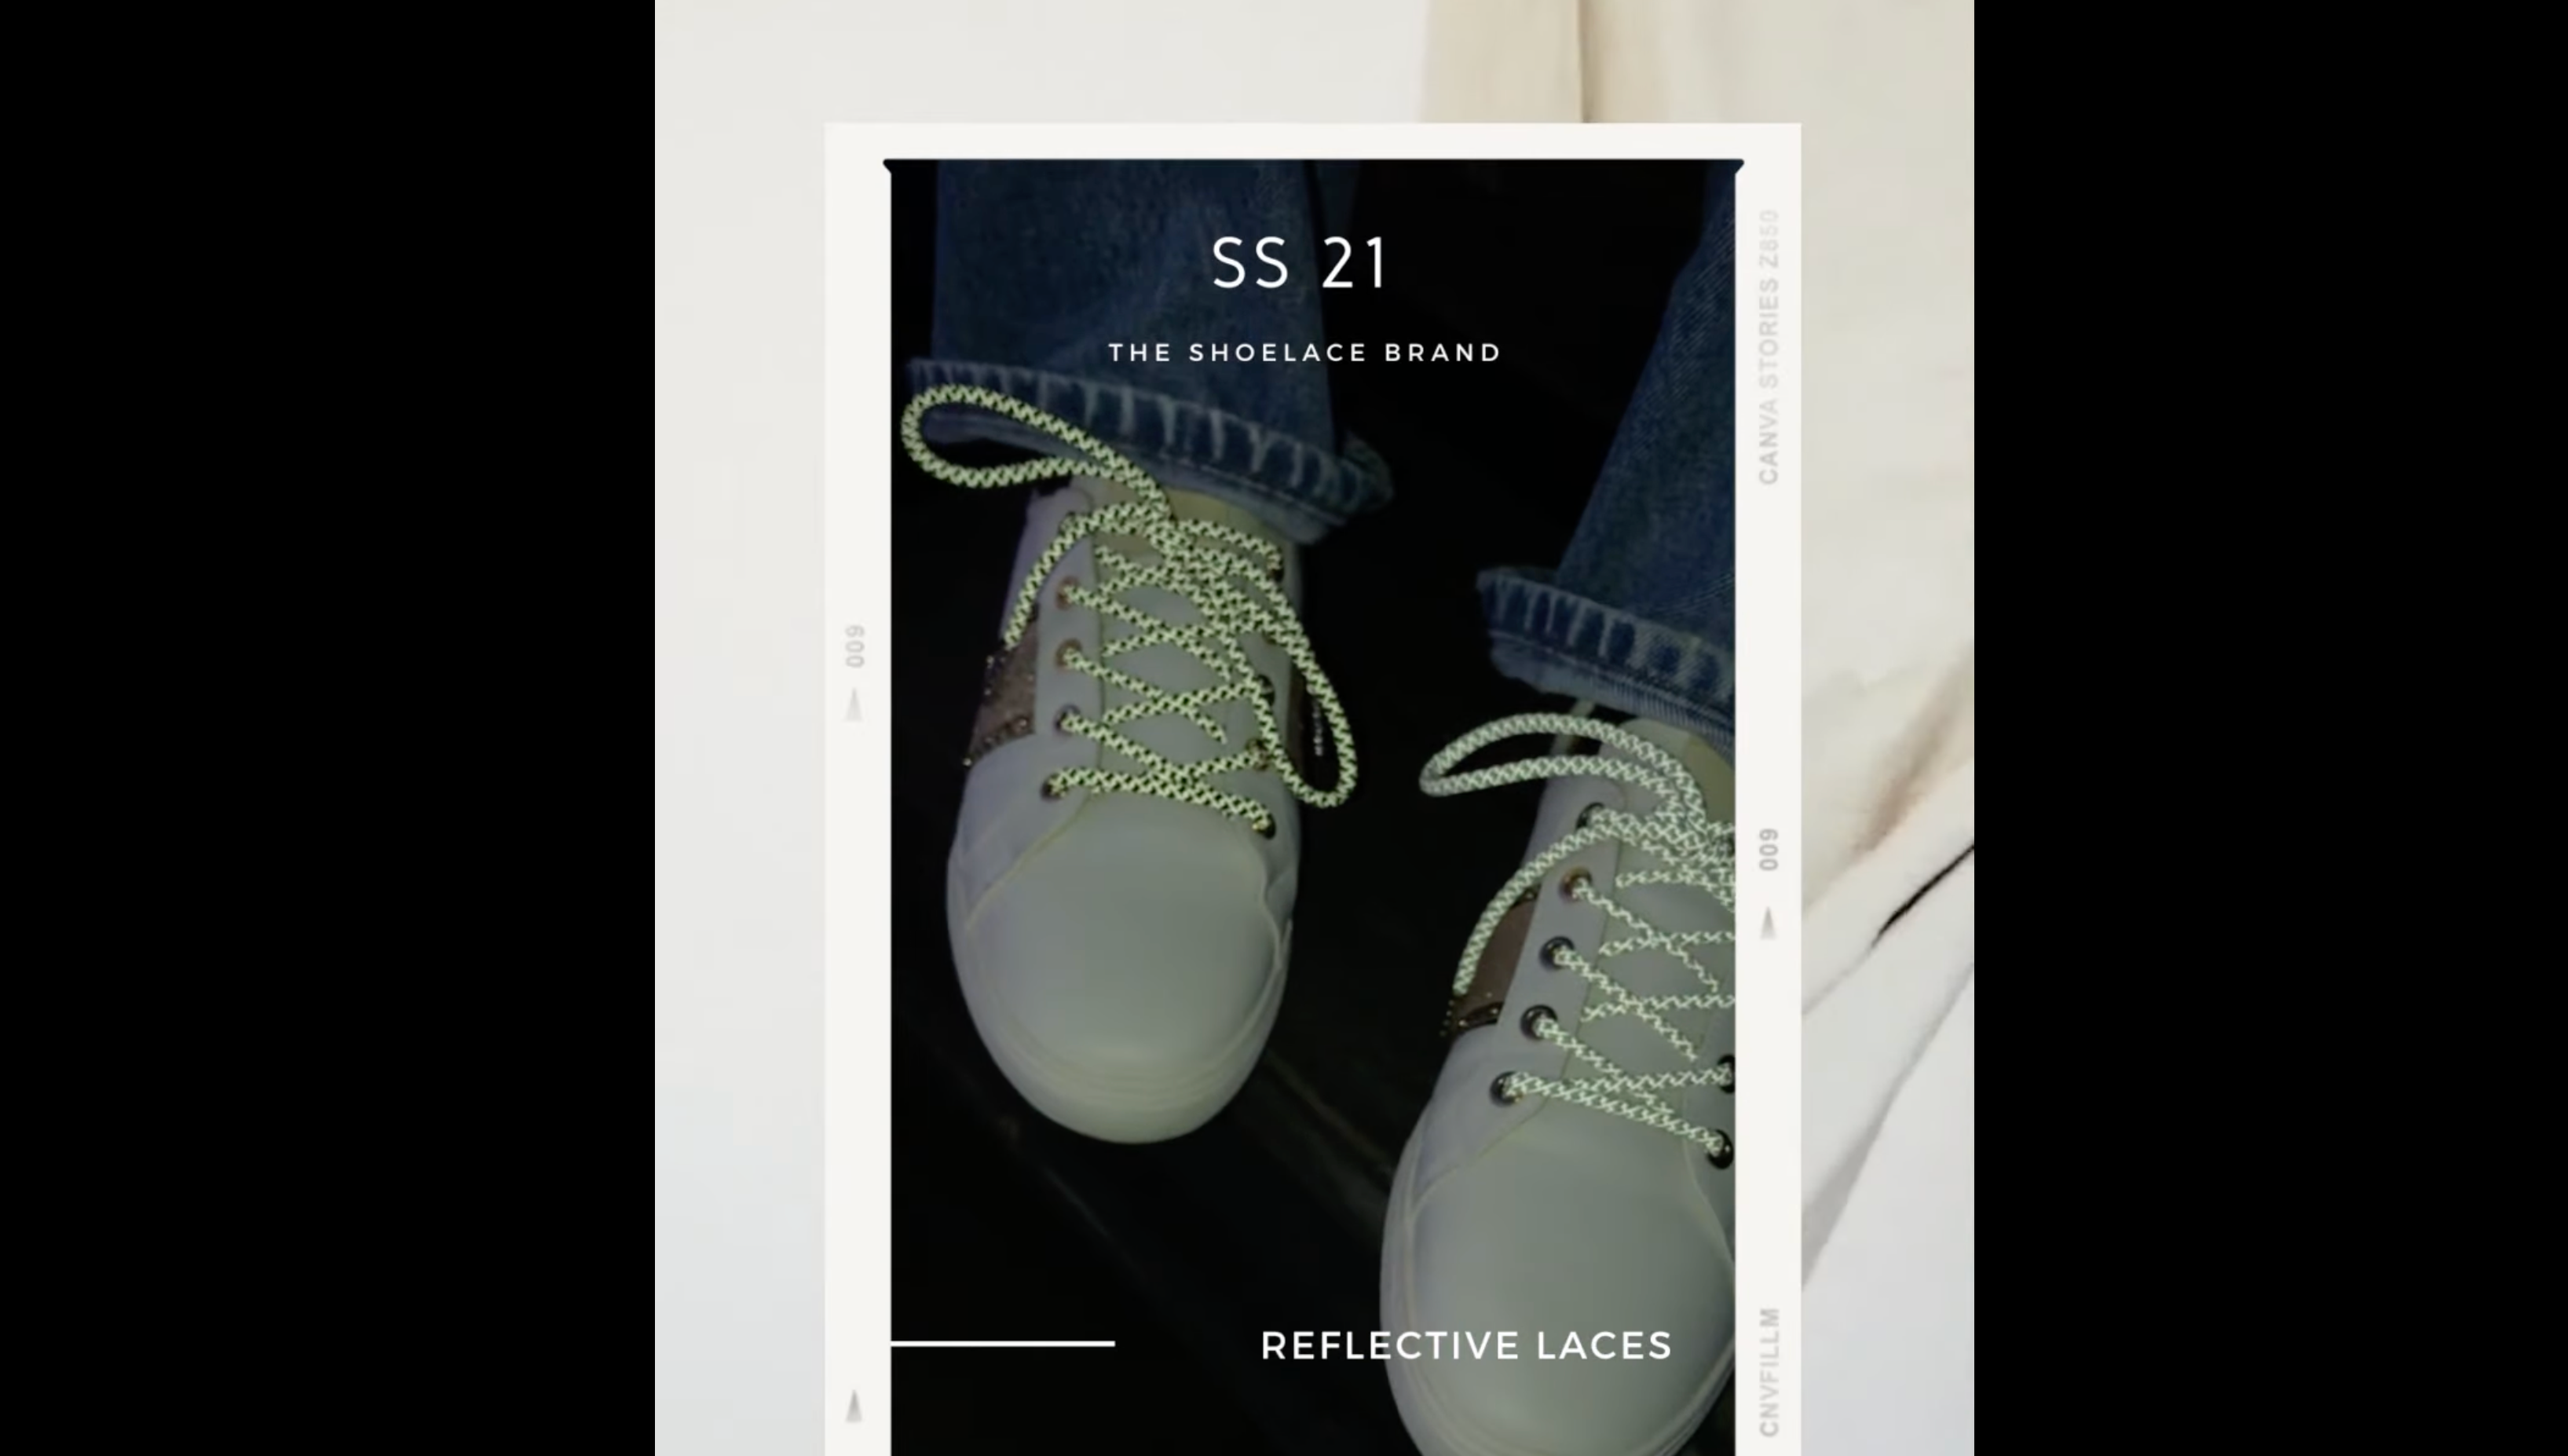 Load video: Reflective shoelaces that shine superbly, reflective laces!